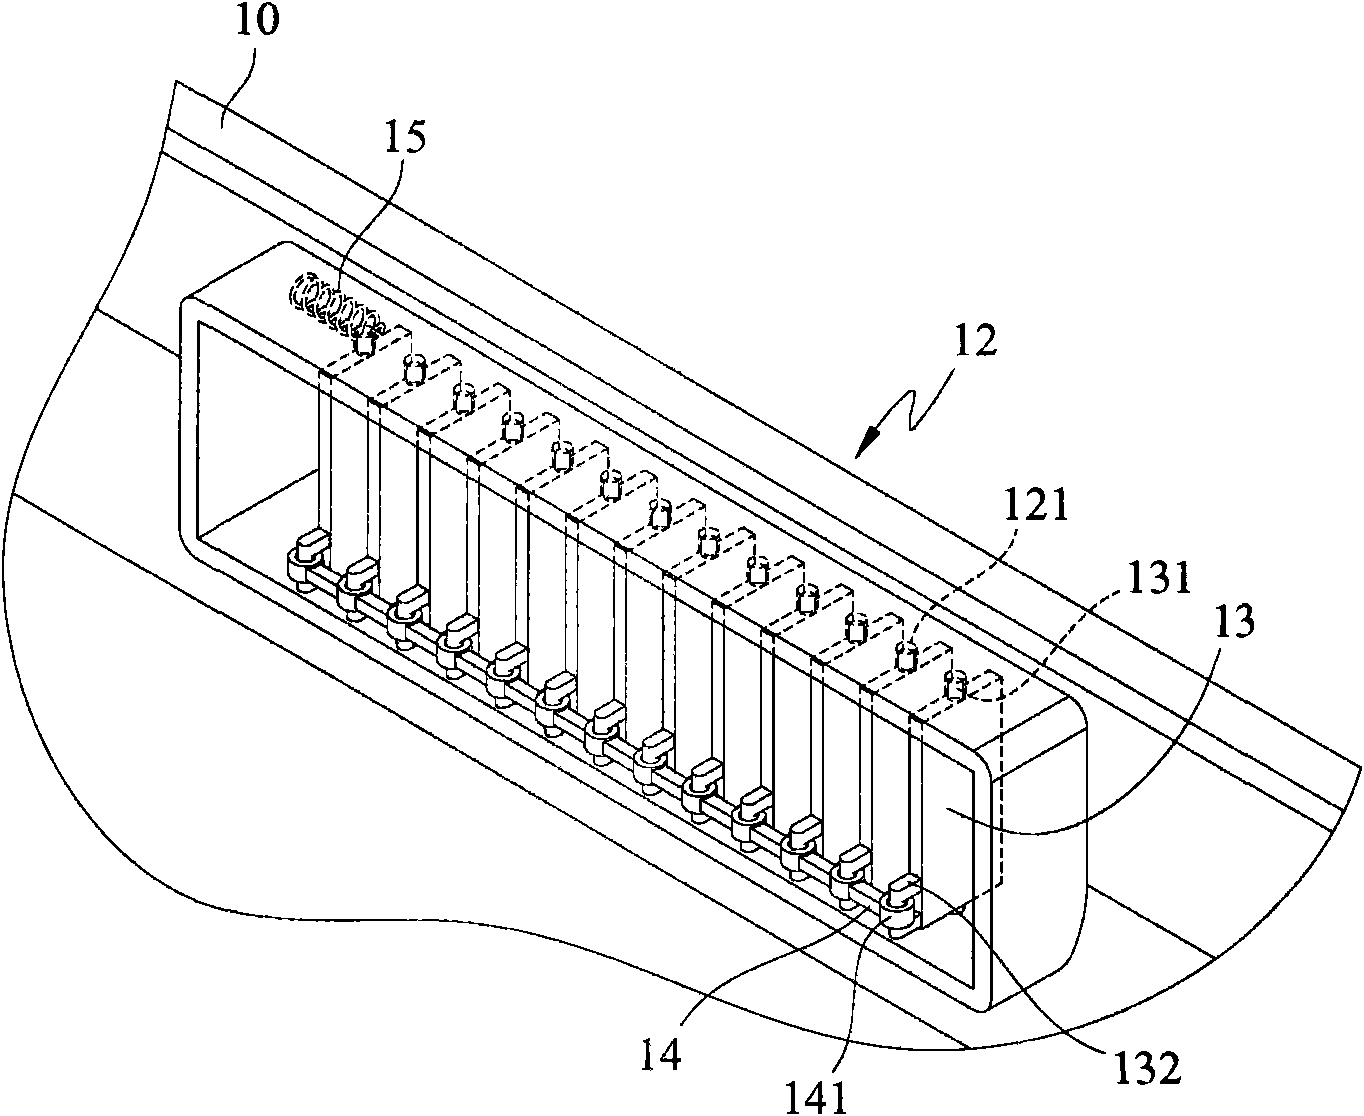 Air guiding structure